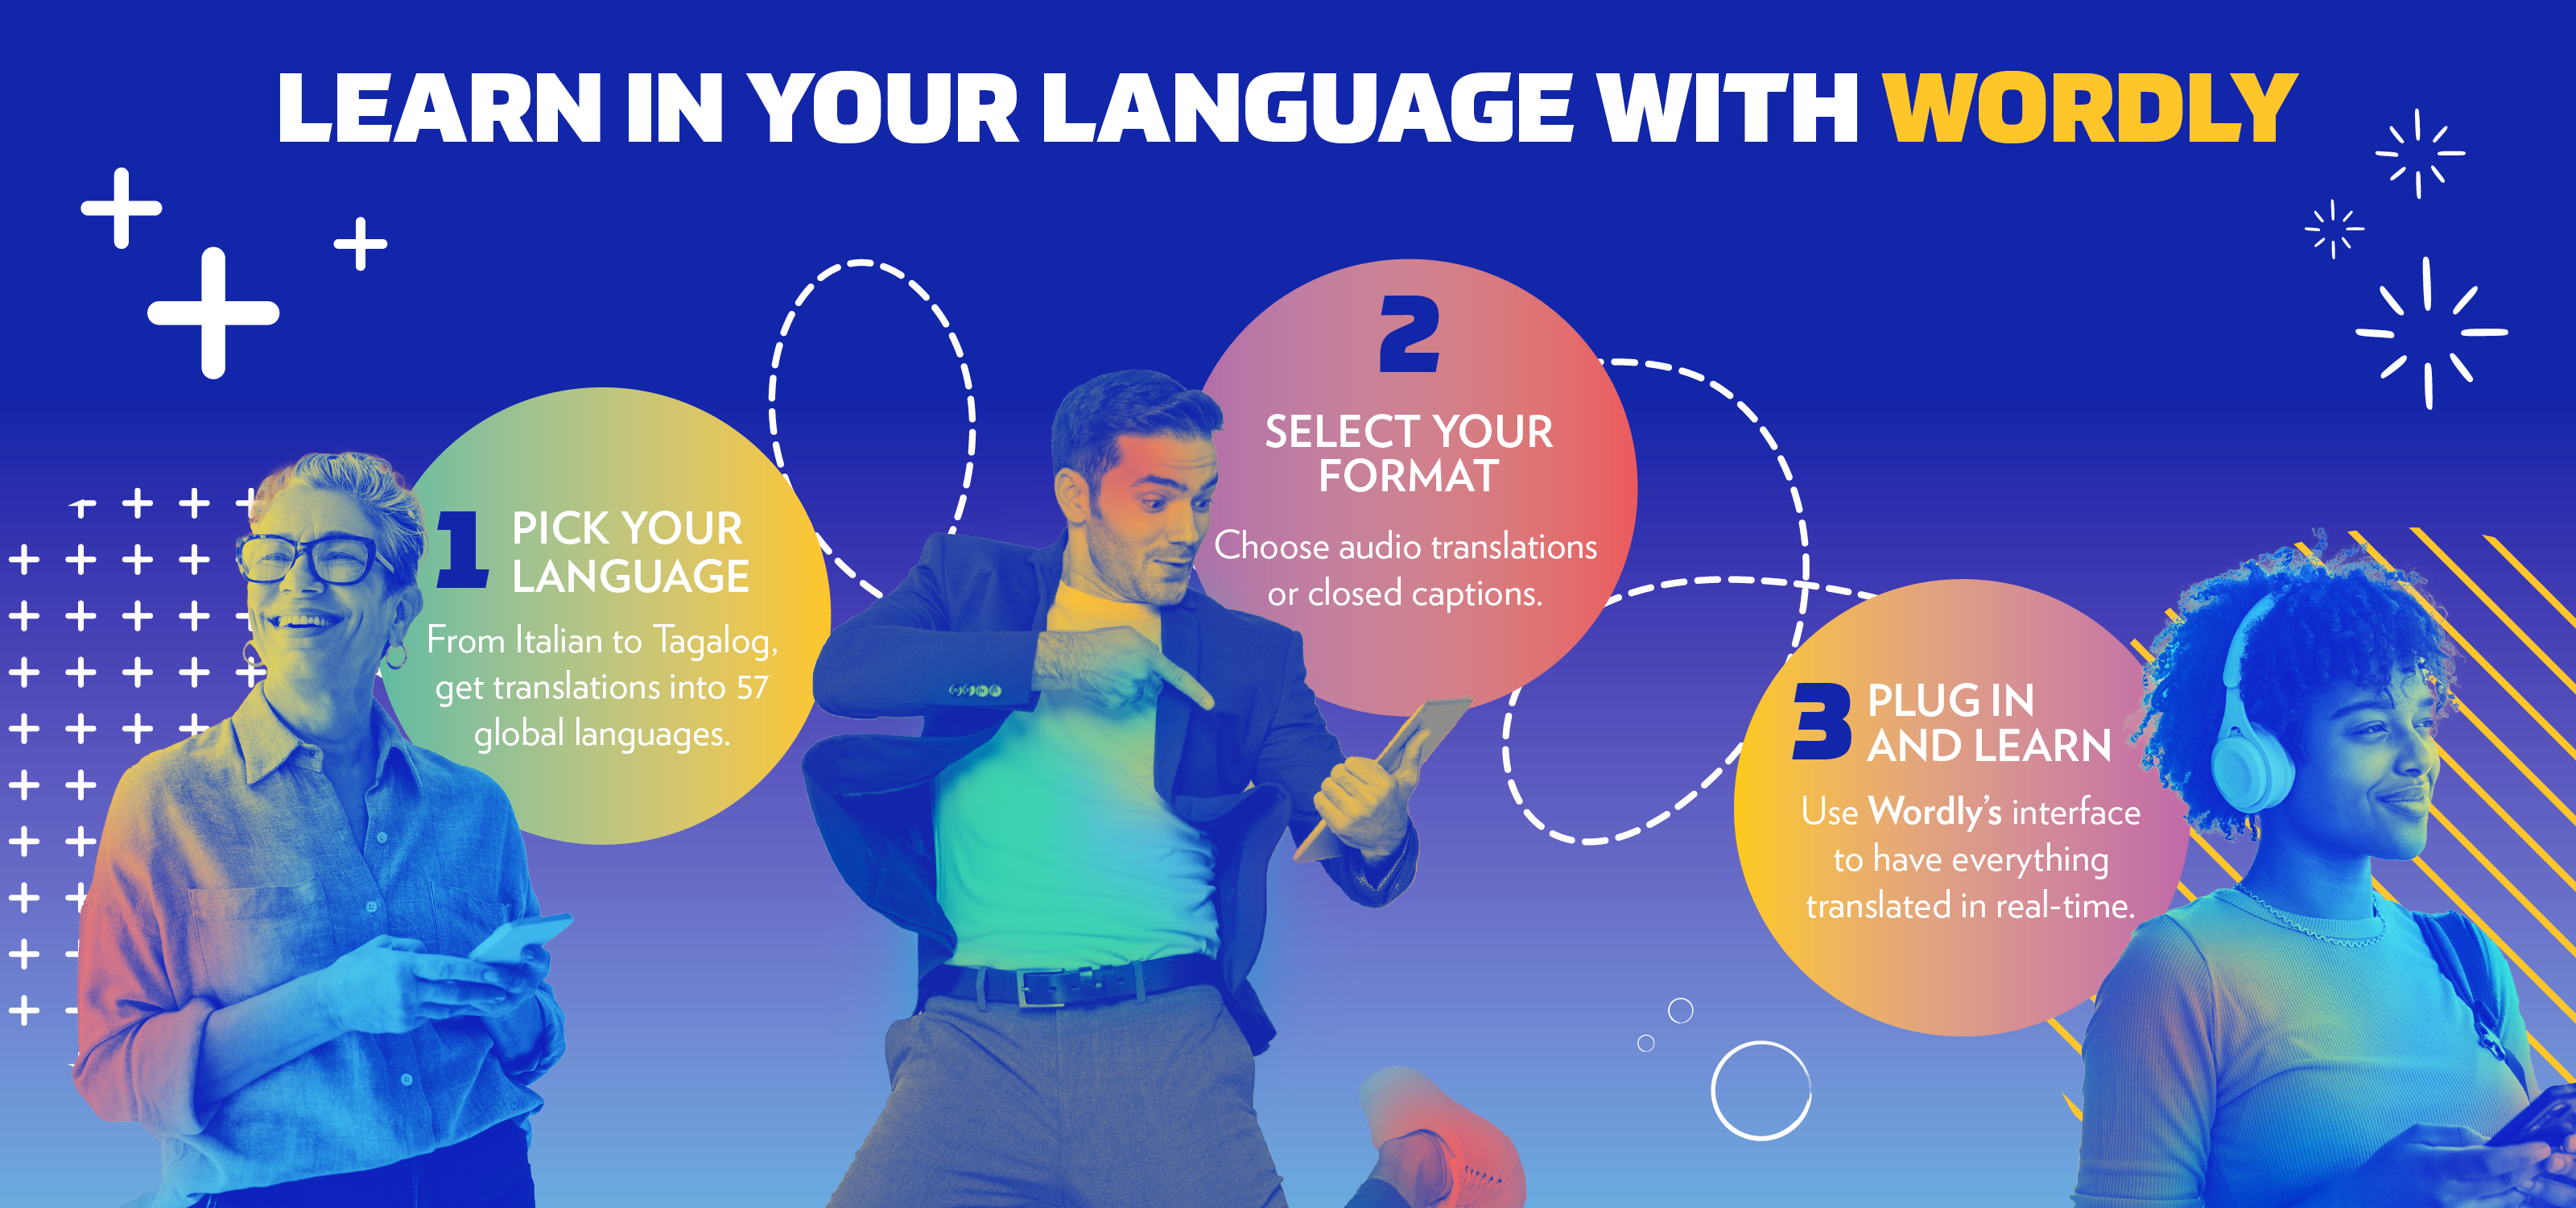 Graphic image: Learn in your language with Wordly